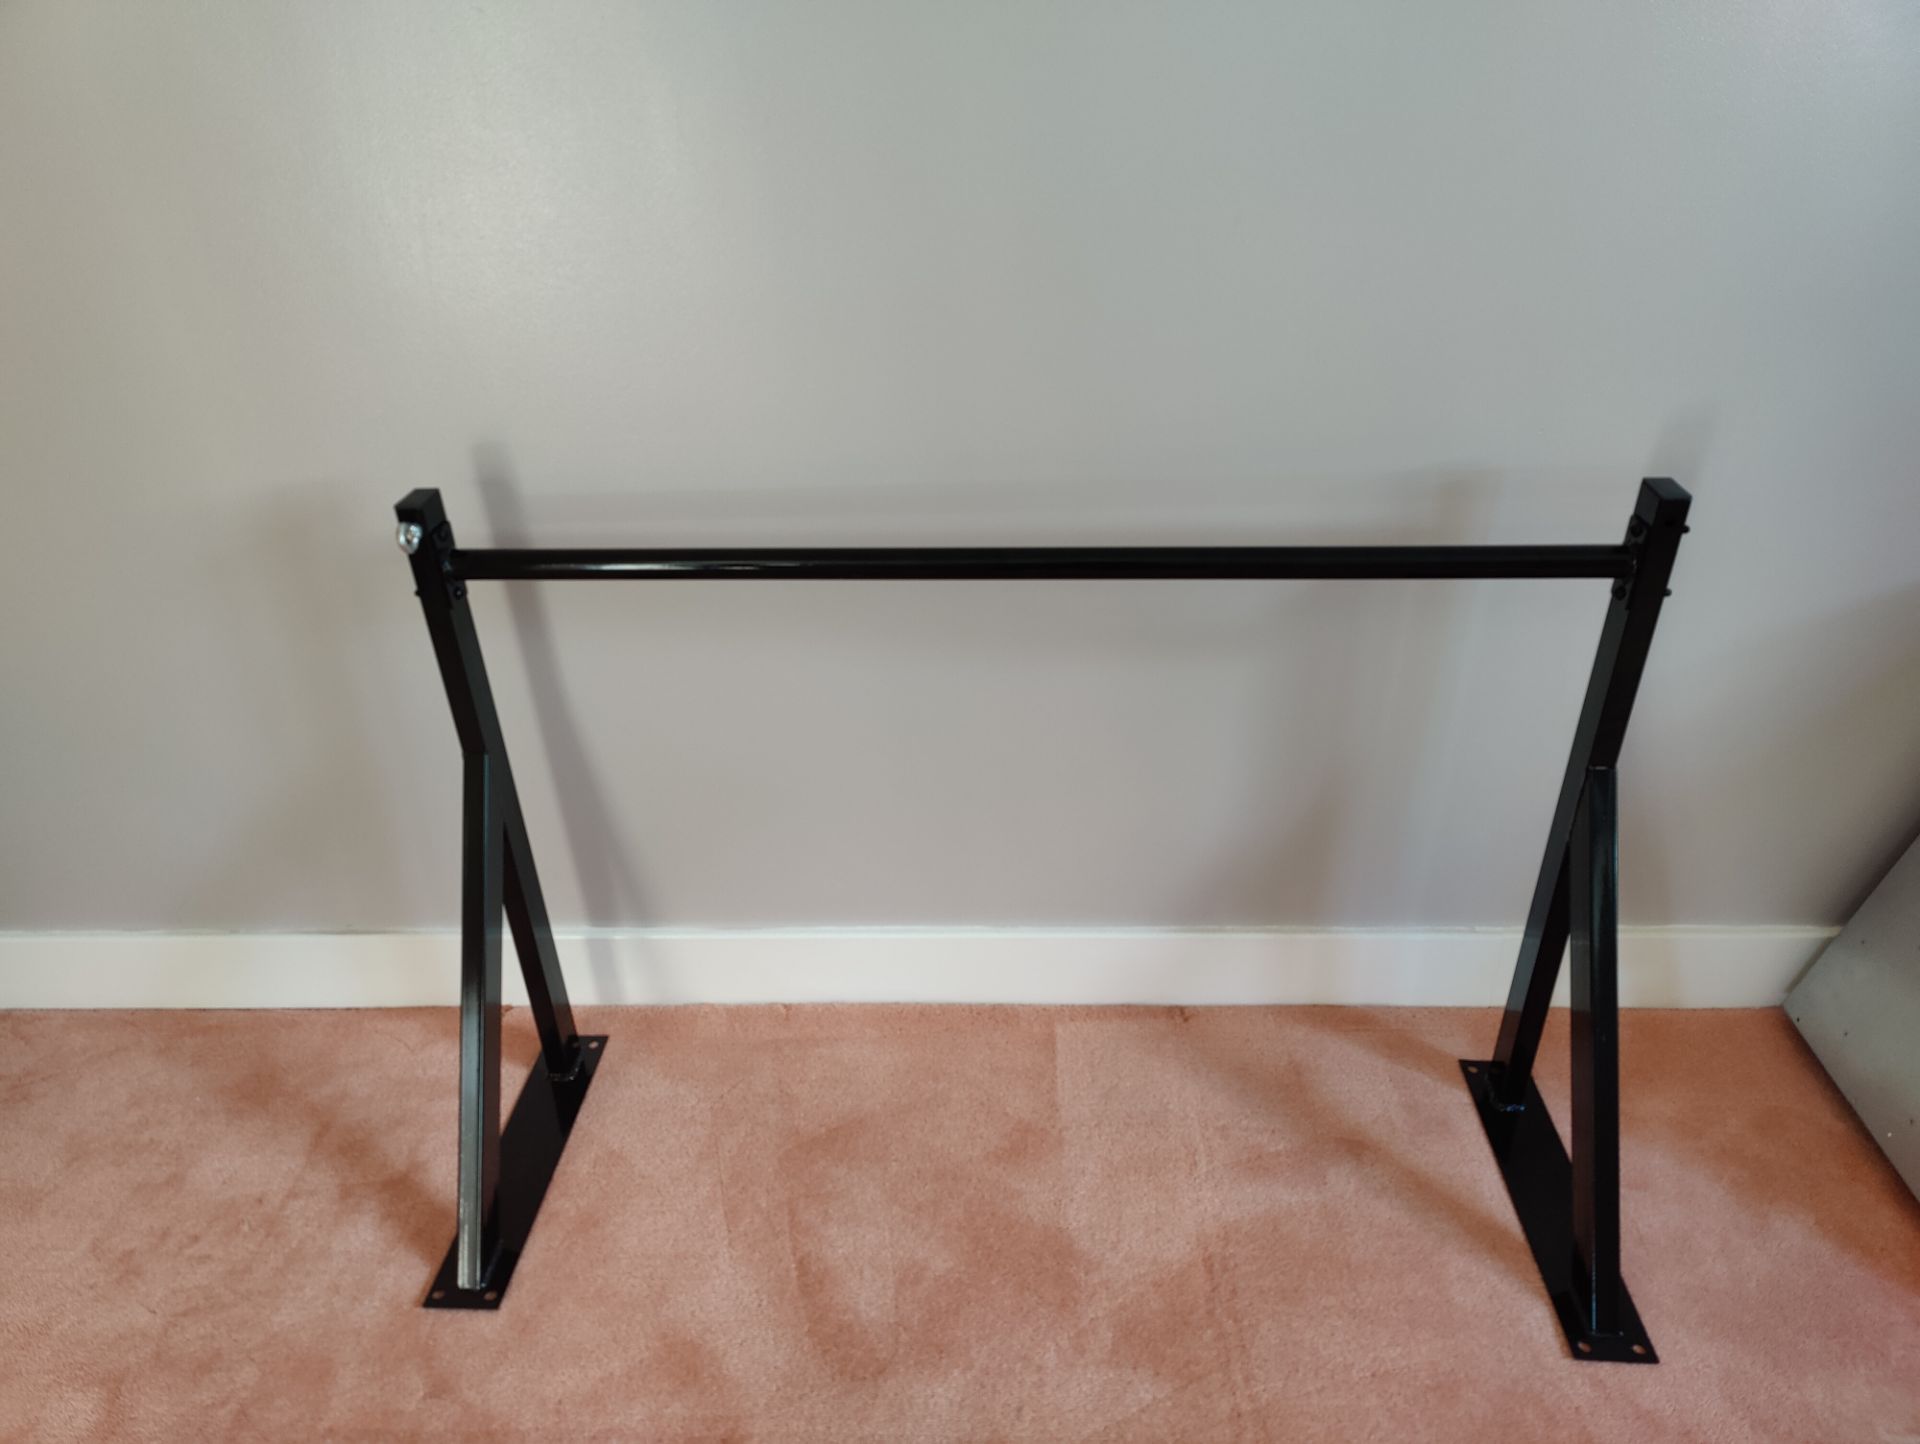 Commercial Gym Wall Mounted Steel Made Pull/Push Chin Up Bar - Image 2 of 3